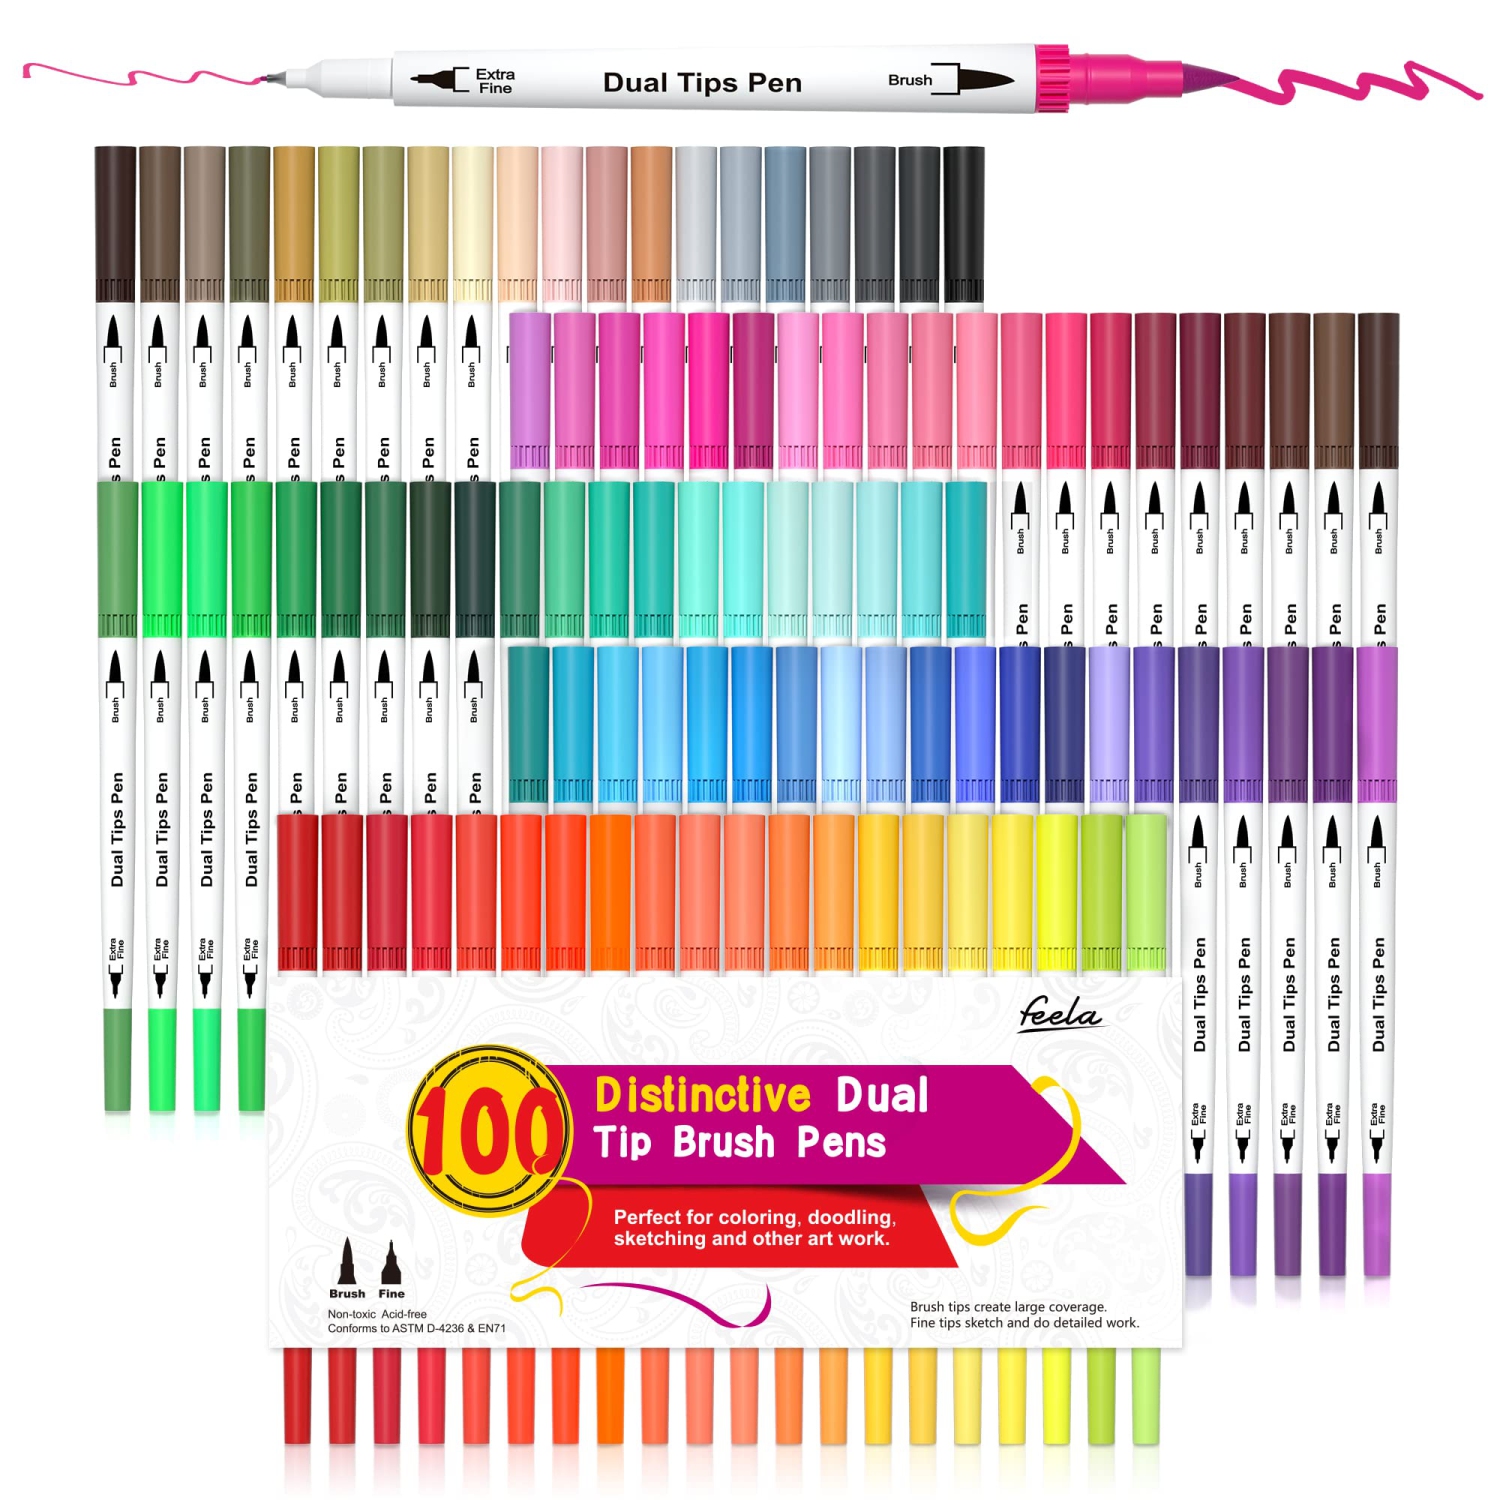 Vibrant Artistry: 100 Colors Dual Tip Brush Pens - Watercolor, Fineliners, and Highlighters for Adult Coloring, Sketching, Calligraphy, Manga, and Journaling